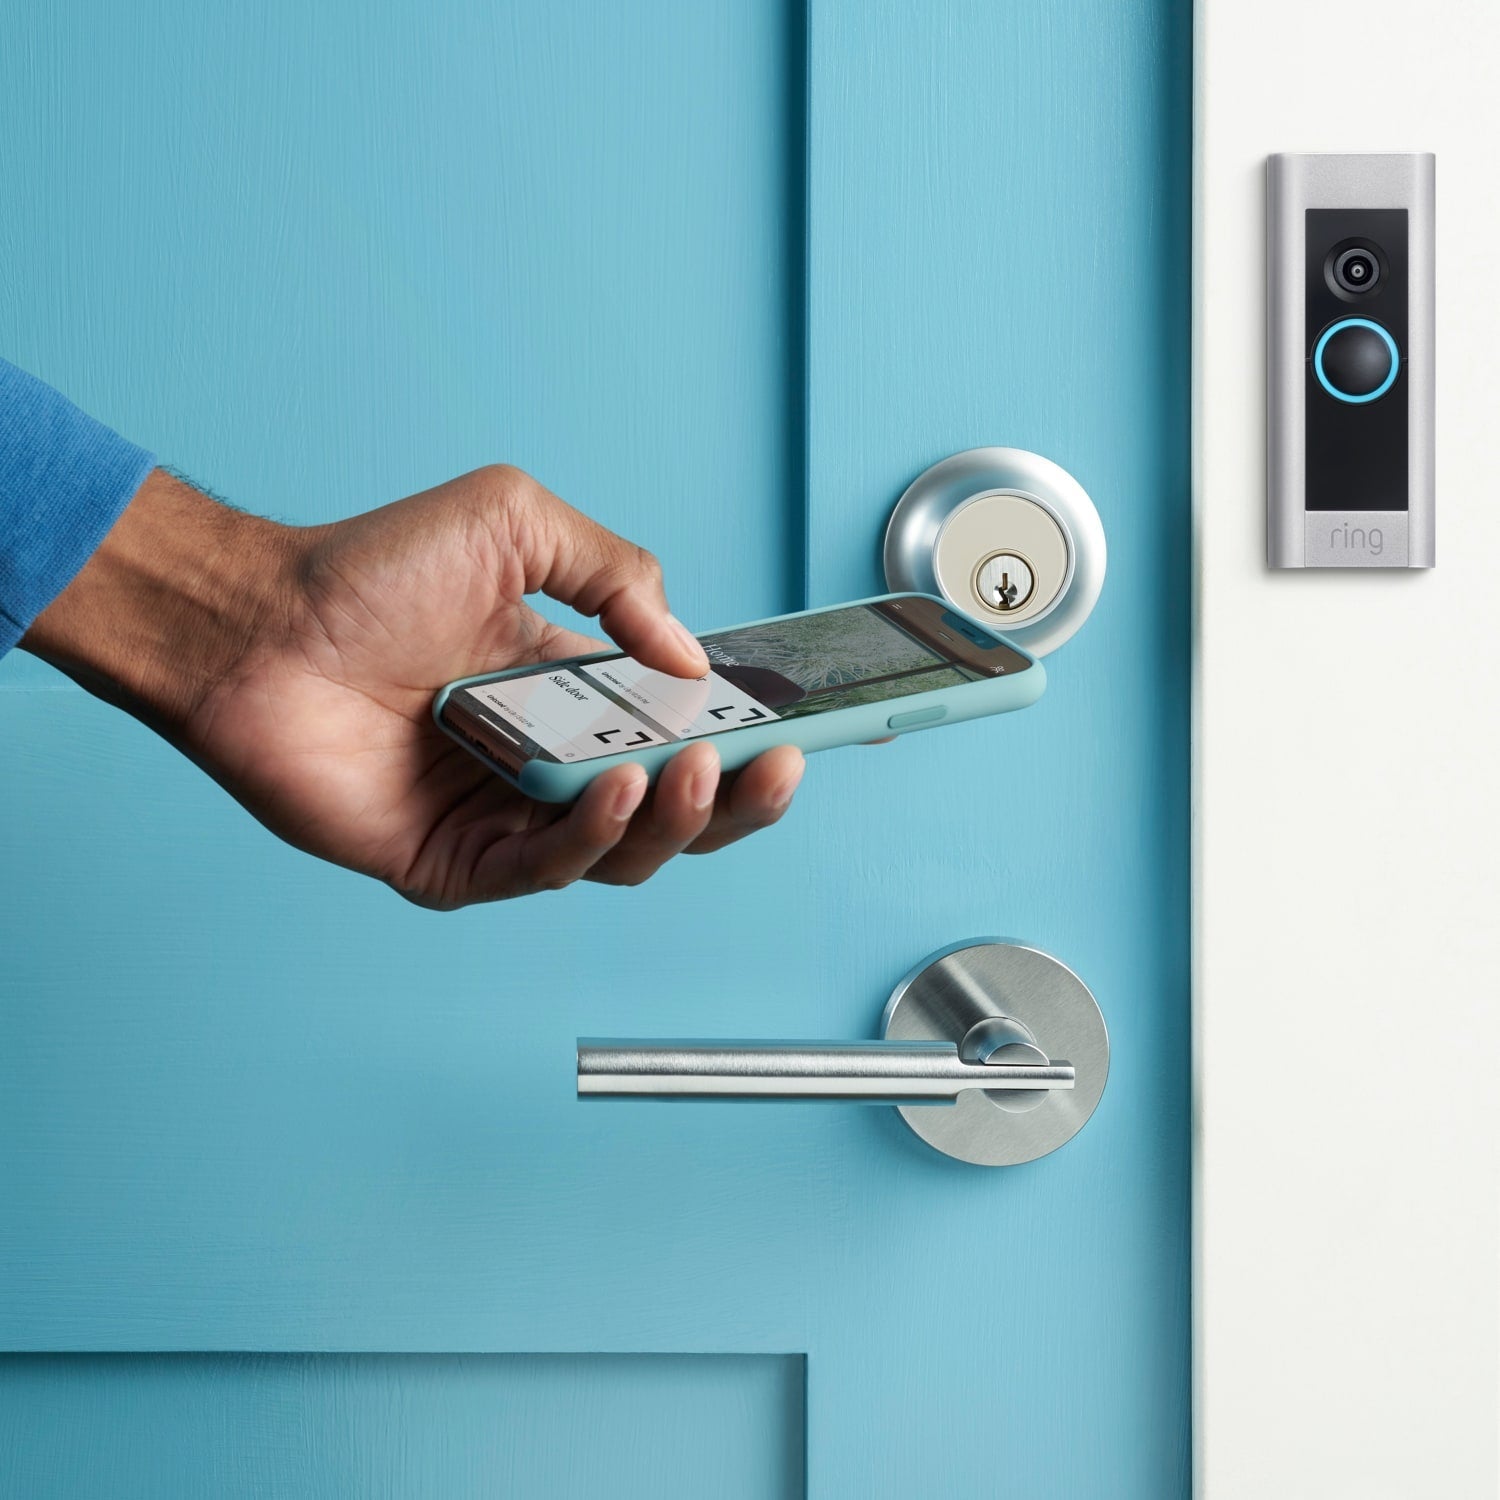 Wired Doorbell Plus (Video Doorbell Pro) (for Certified Refurbished) - Close-up of hand holding smartphone in front of a door with a Video Doorbell Pro mounted next to it.